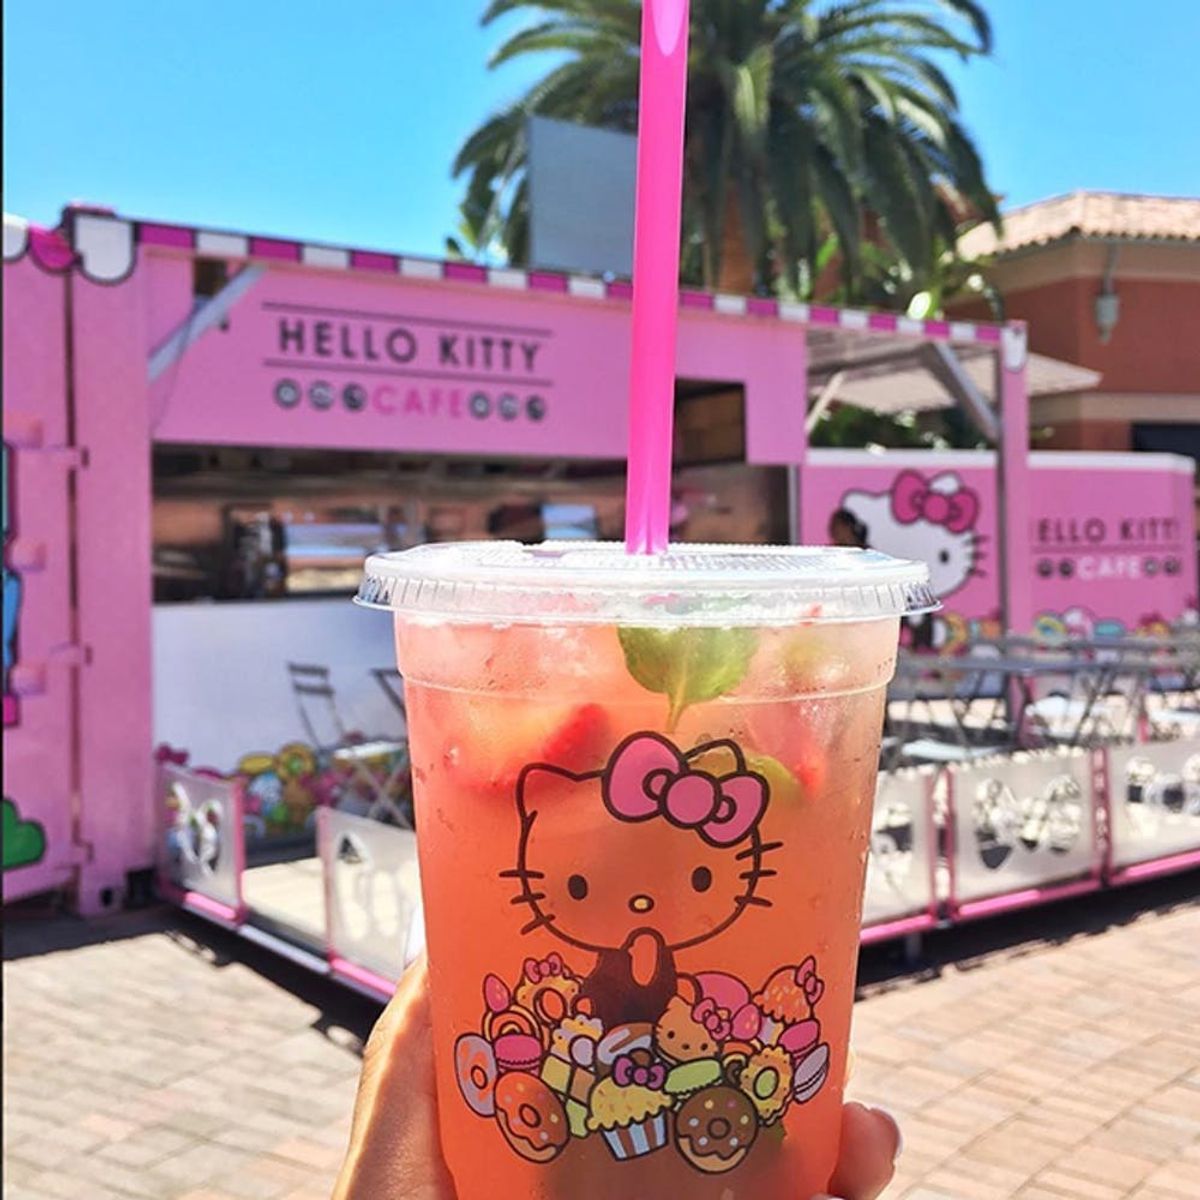 The First Hello Kitty Cafe Just Opened in America and It’s Cute AF